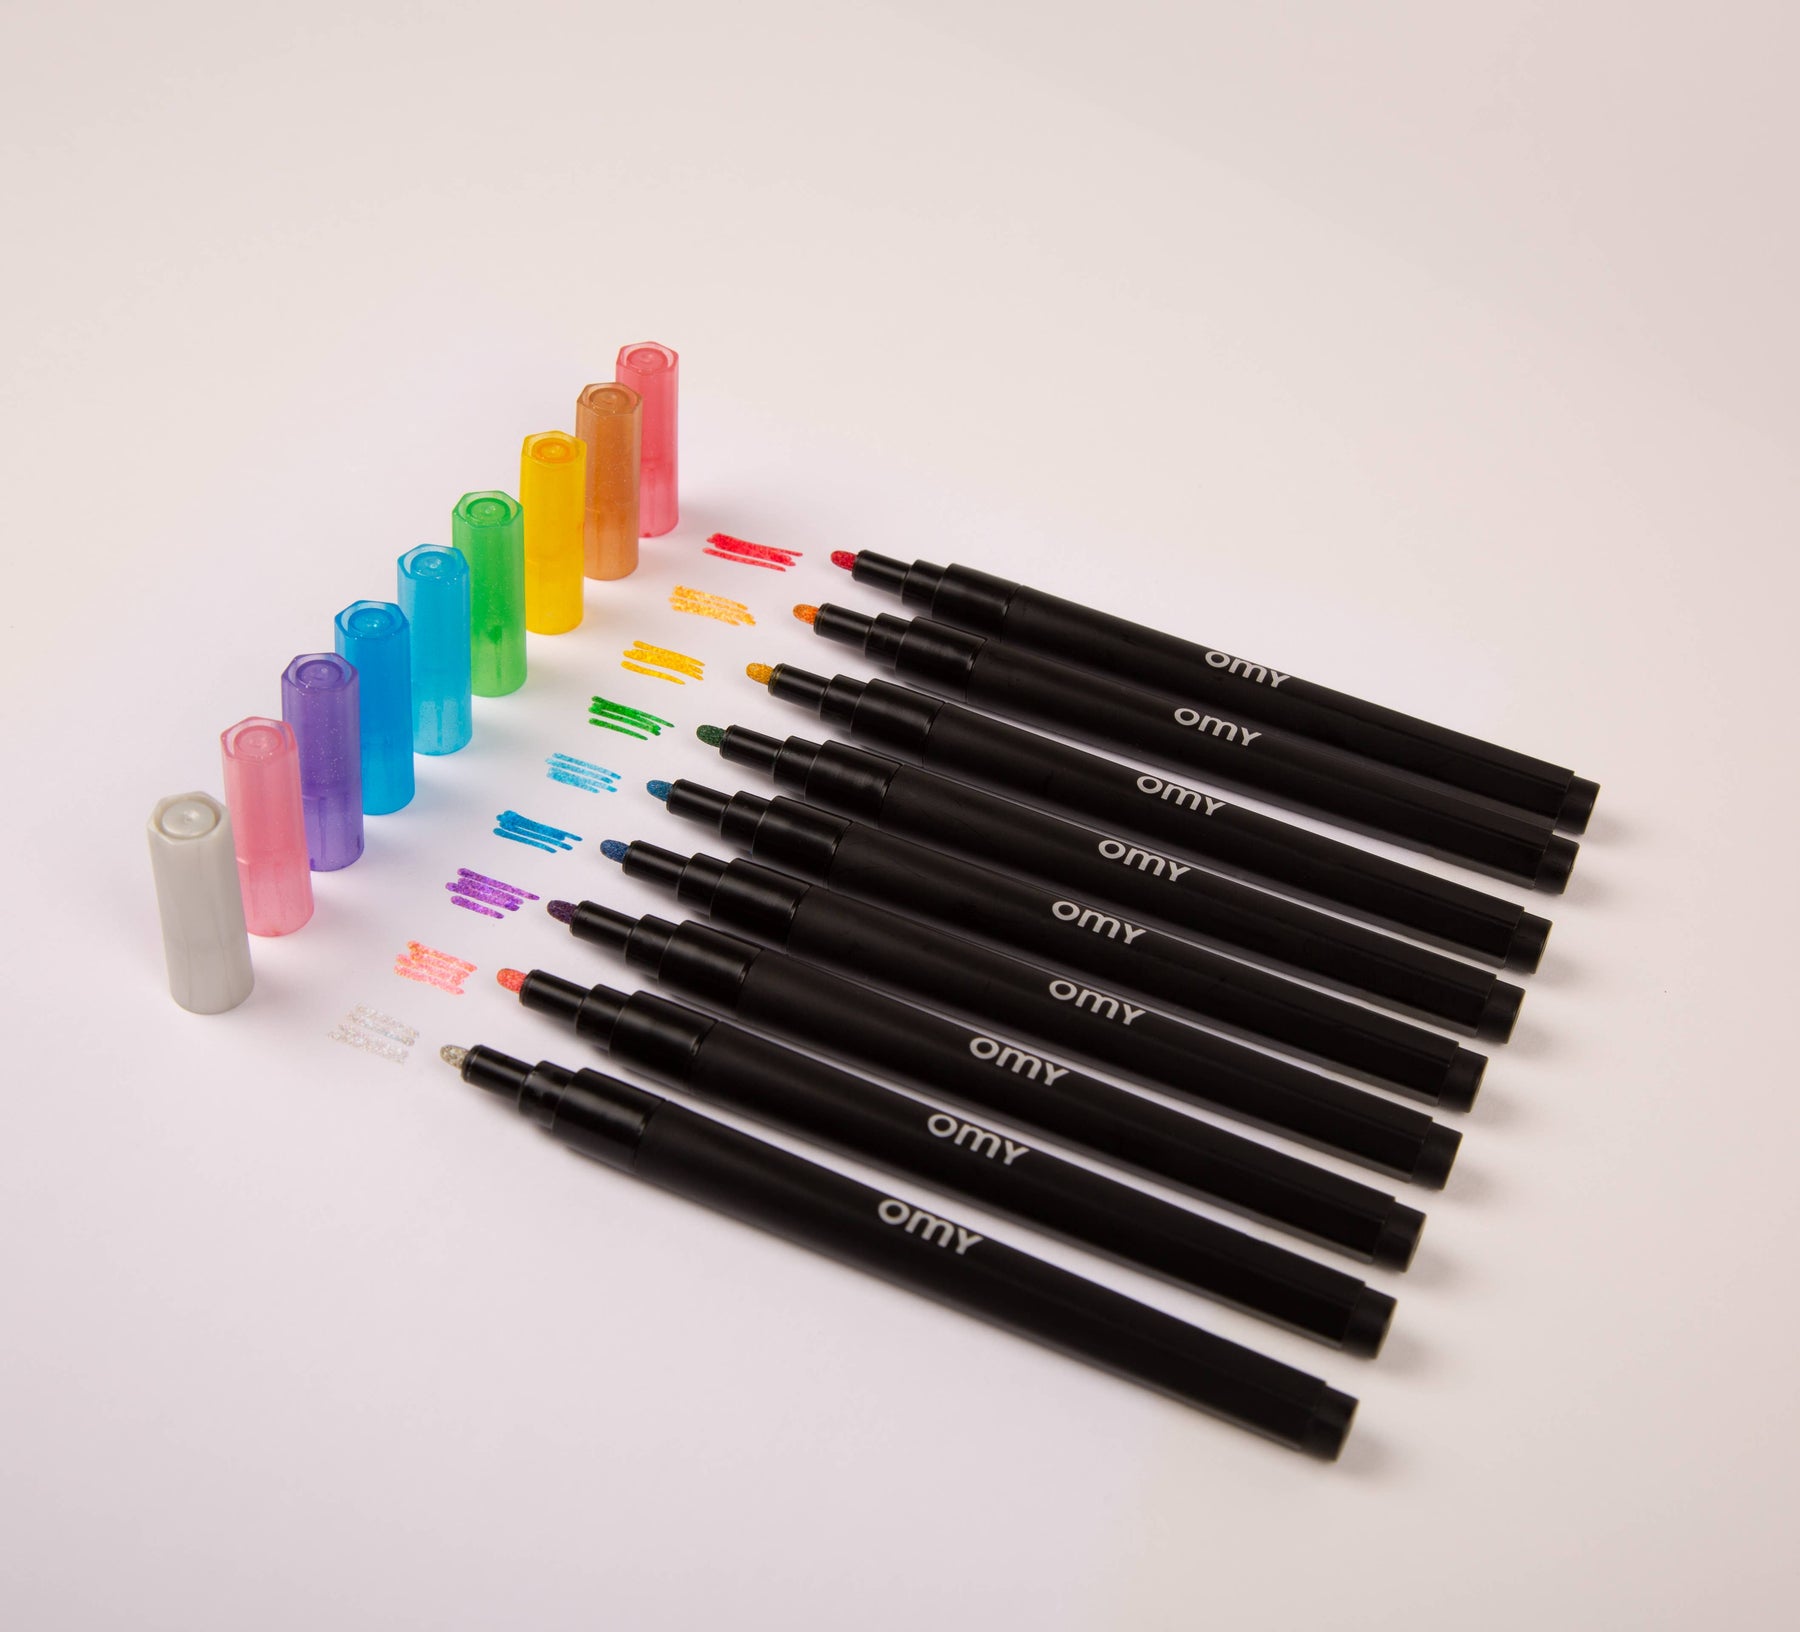 A row of glitter markers in vibrant colors, including blue, violet, yellow, silver, green, and pink. Shimmery and waterproof, perfect for adding sparkles to drawings on various surfaces.